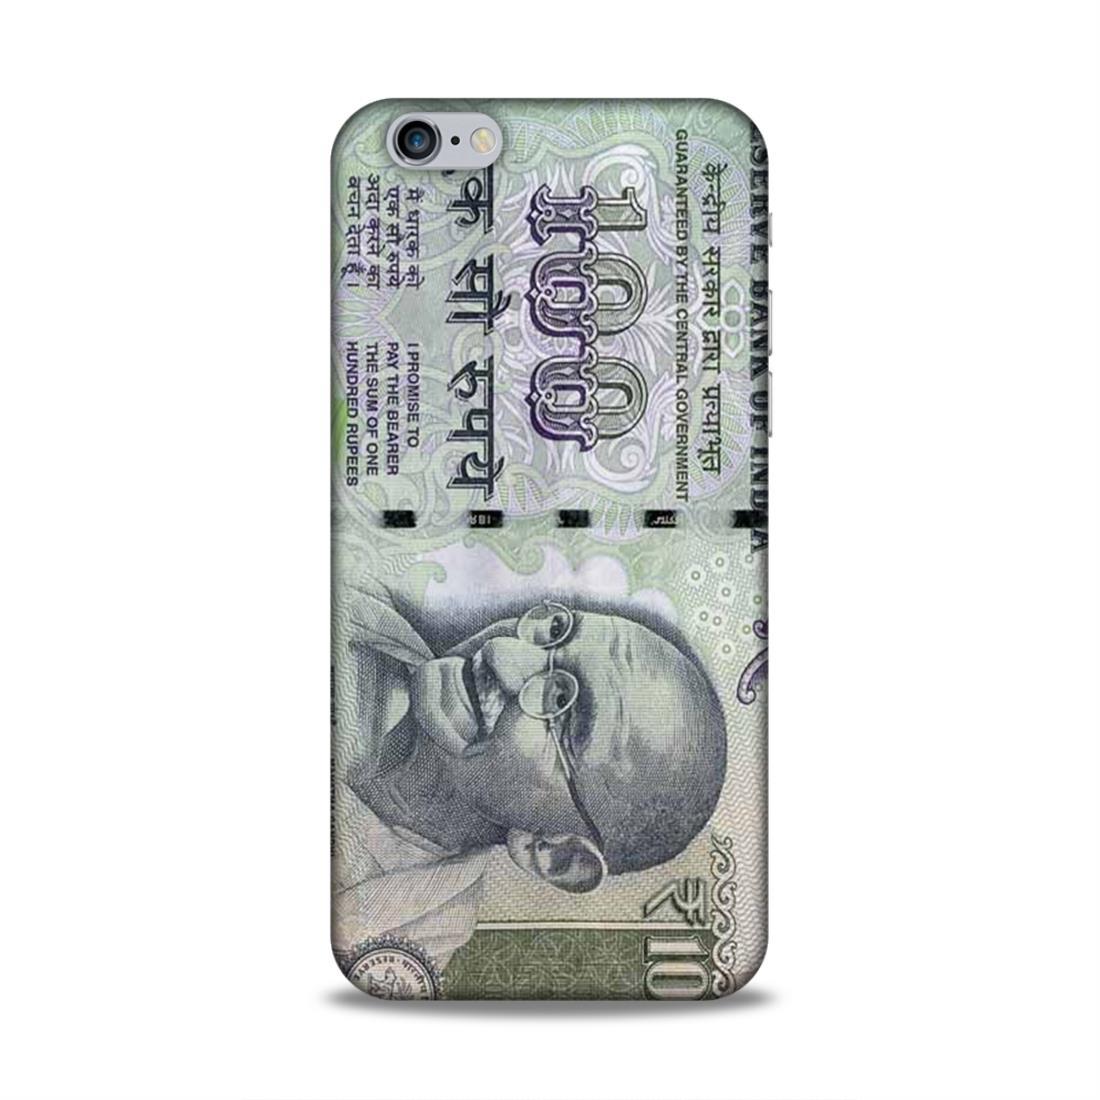 Rs 100 Currency Note iPhone 6 Phone Cover Case